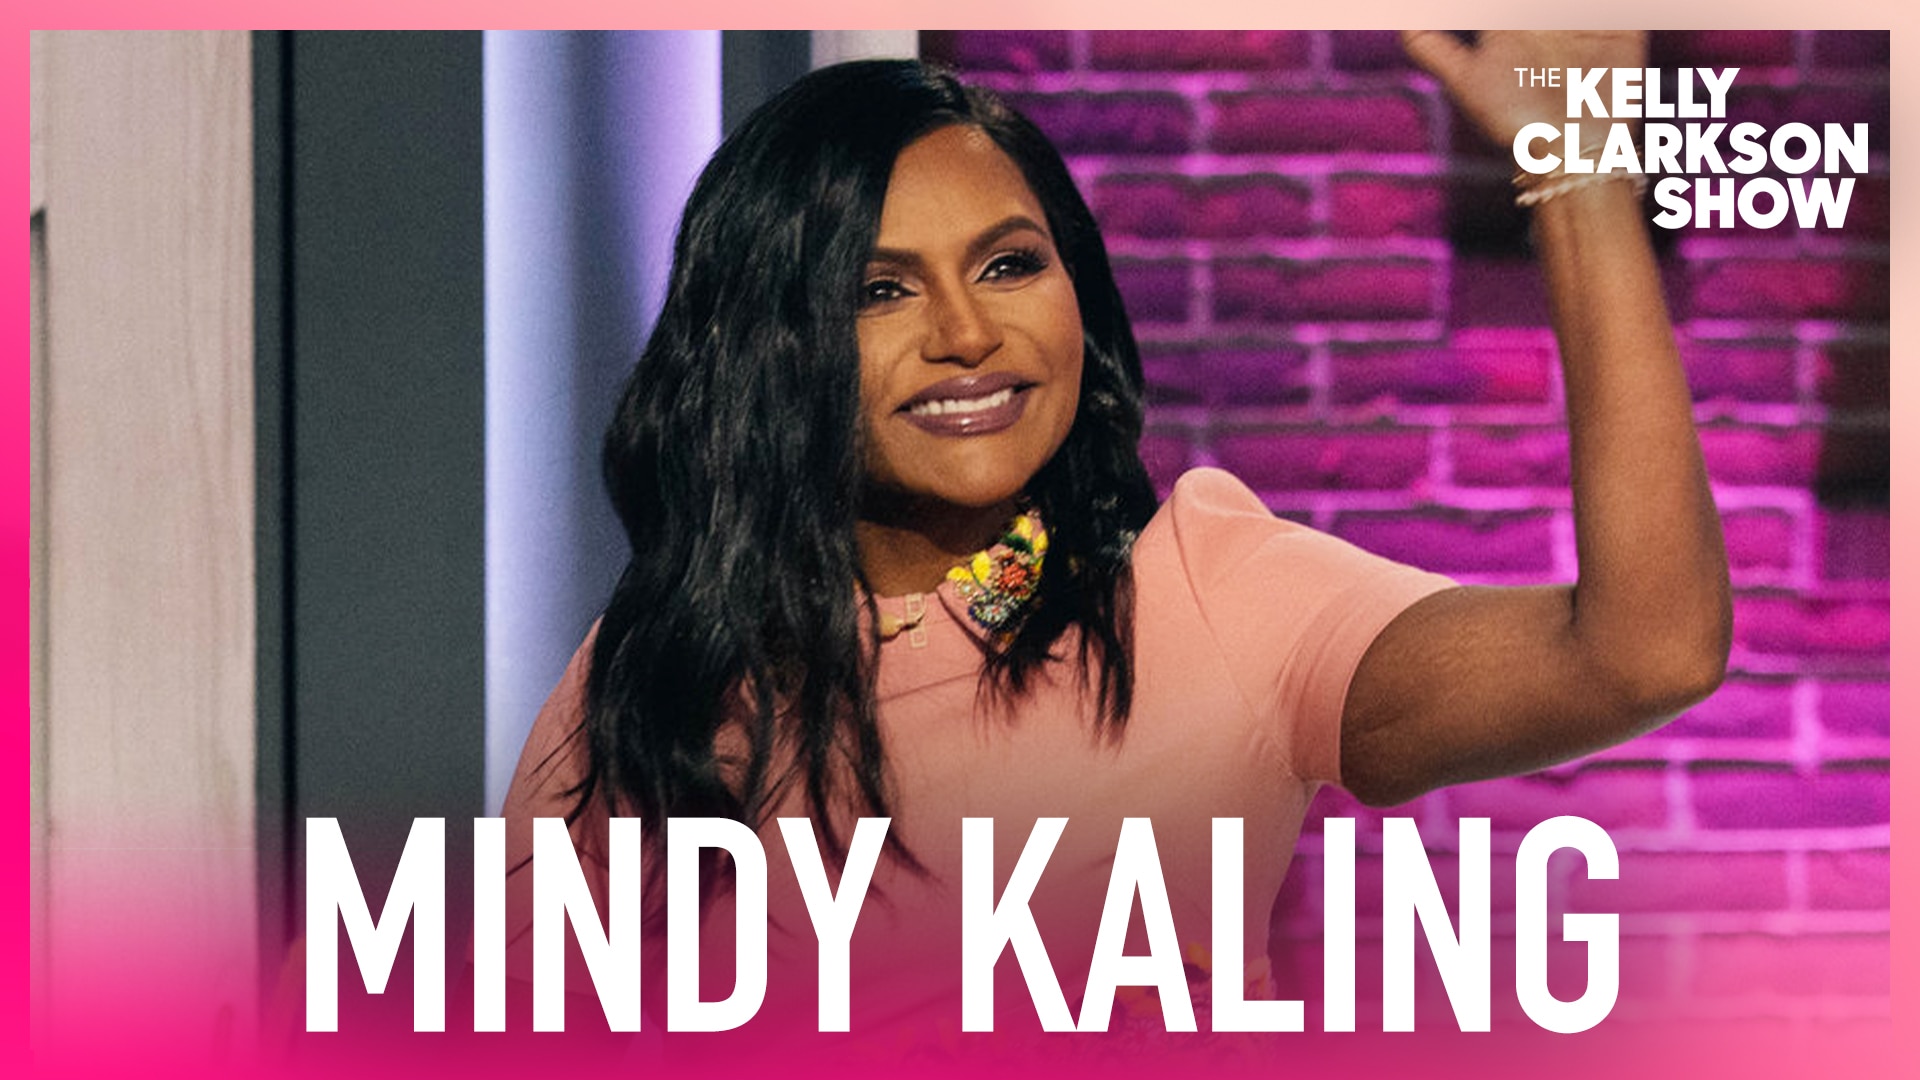 Watch The Kelly Clarkson Show Official Website Highlight Mindy Kaling Is Trying To Avoid